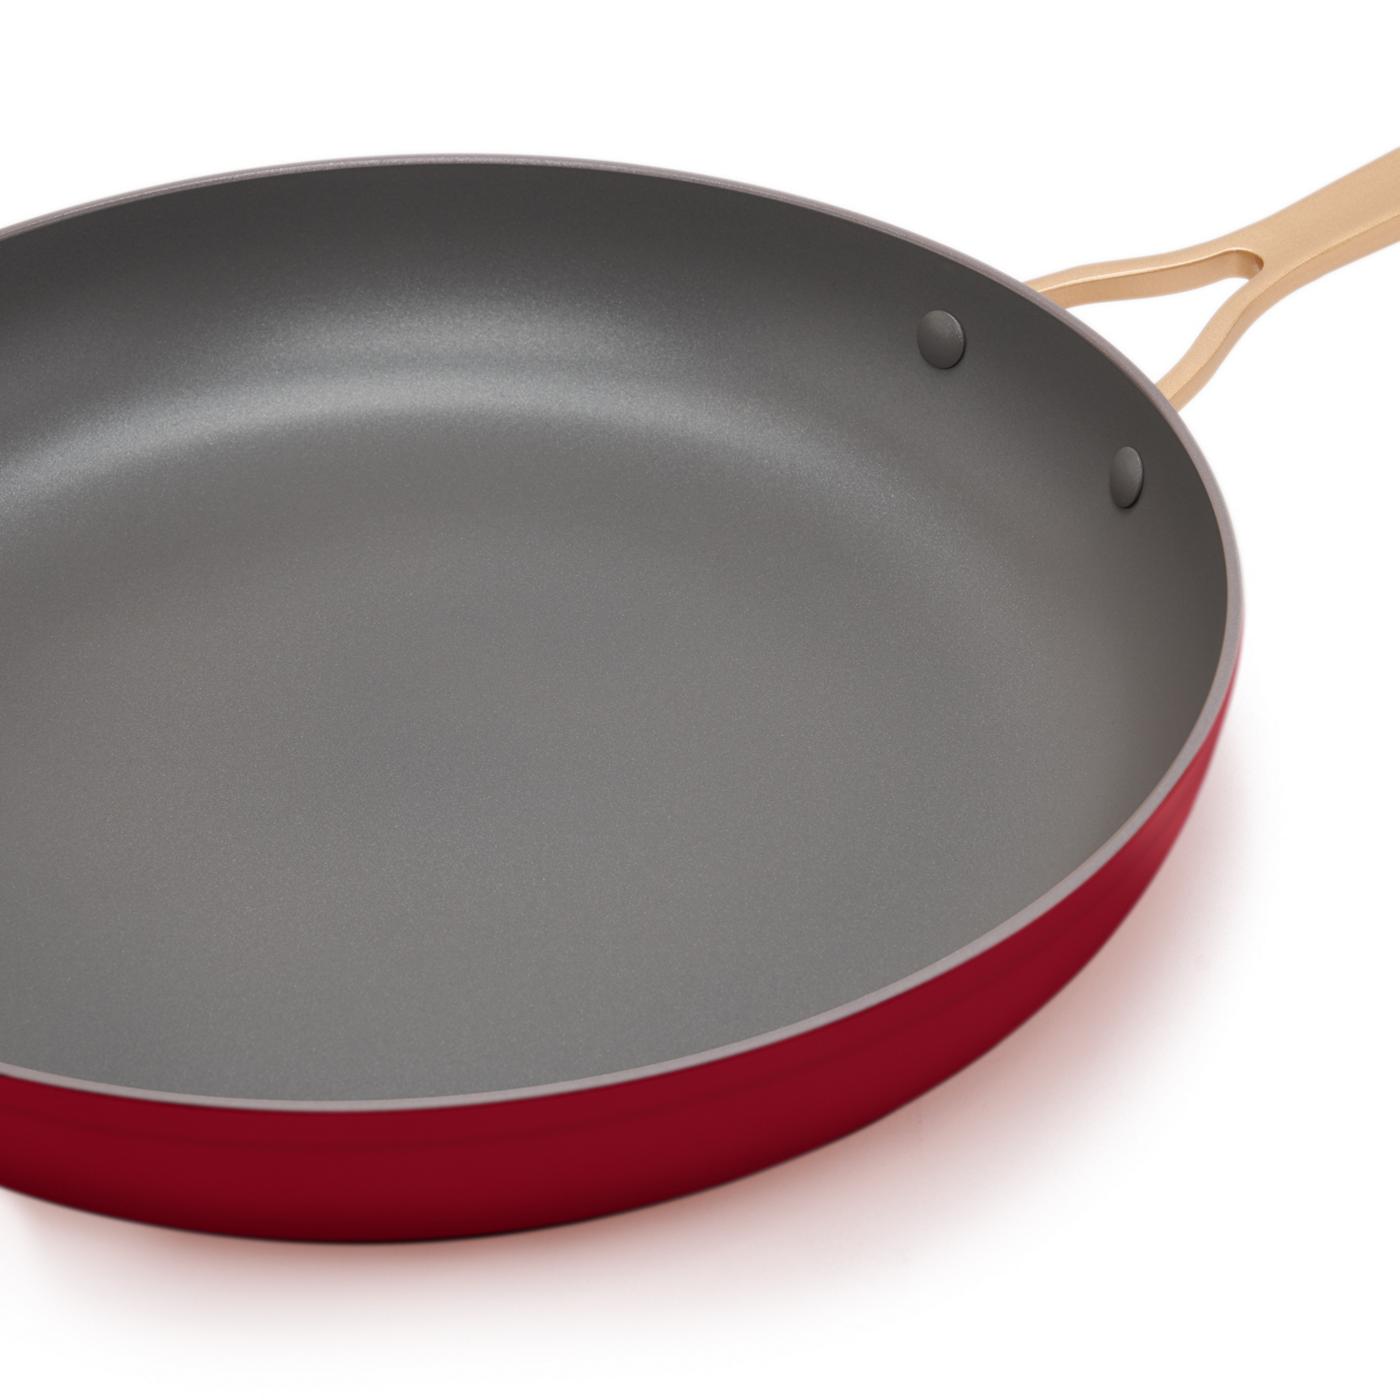 Kitchen & Table by H-E-B Nonstick Fry Pan - Bordeaux Red; image 3 of 6